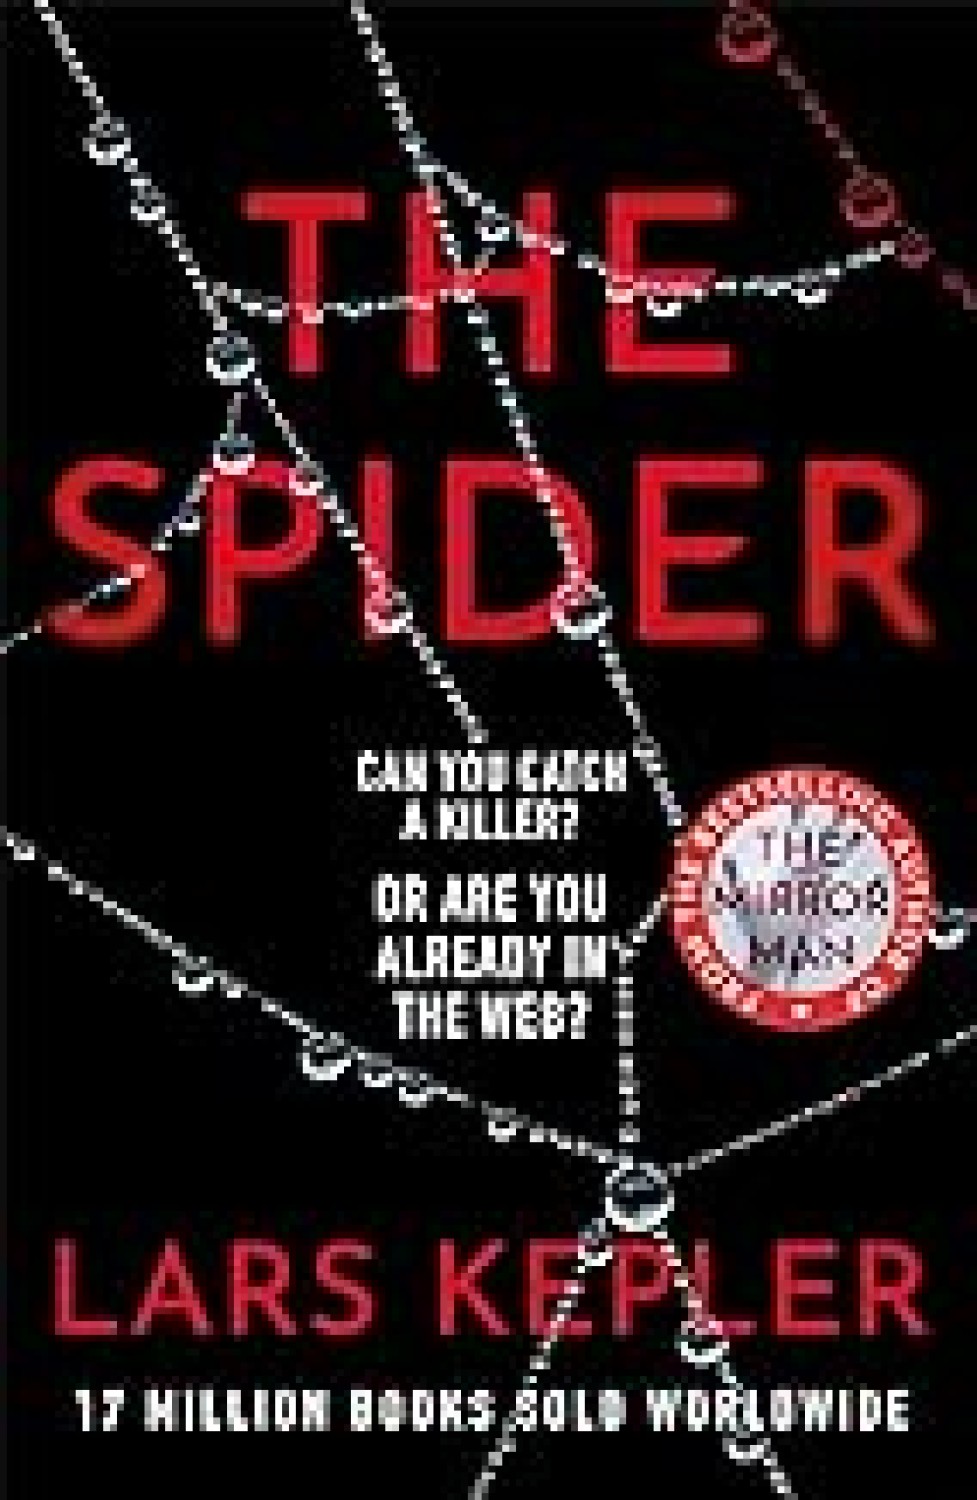 THE SPIDER : CAN YOU CATCH A KILLER? - OR ARE YOU ALREADY IN THE WEB?